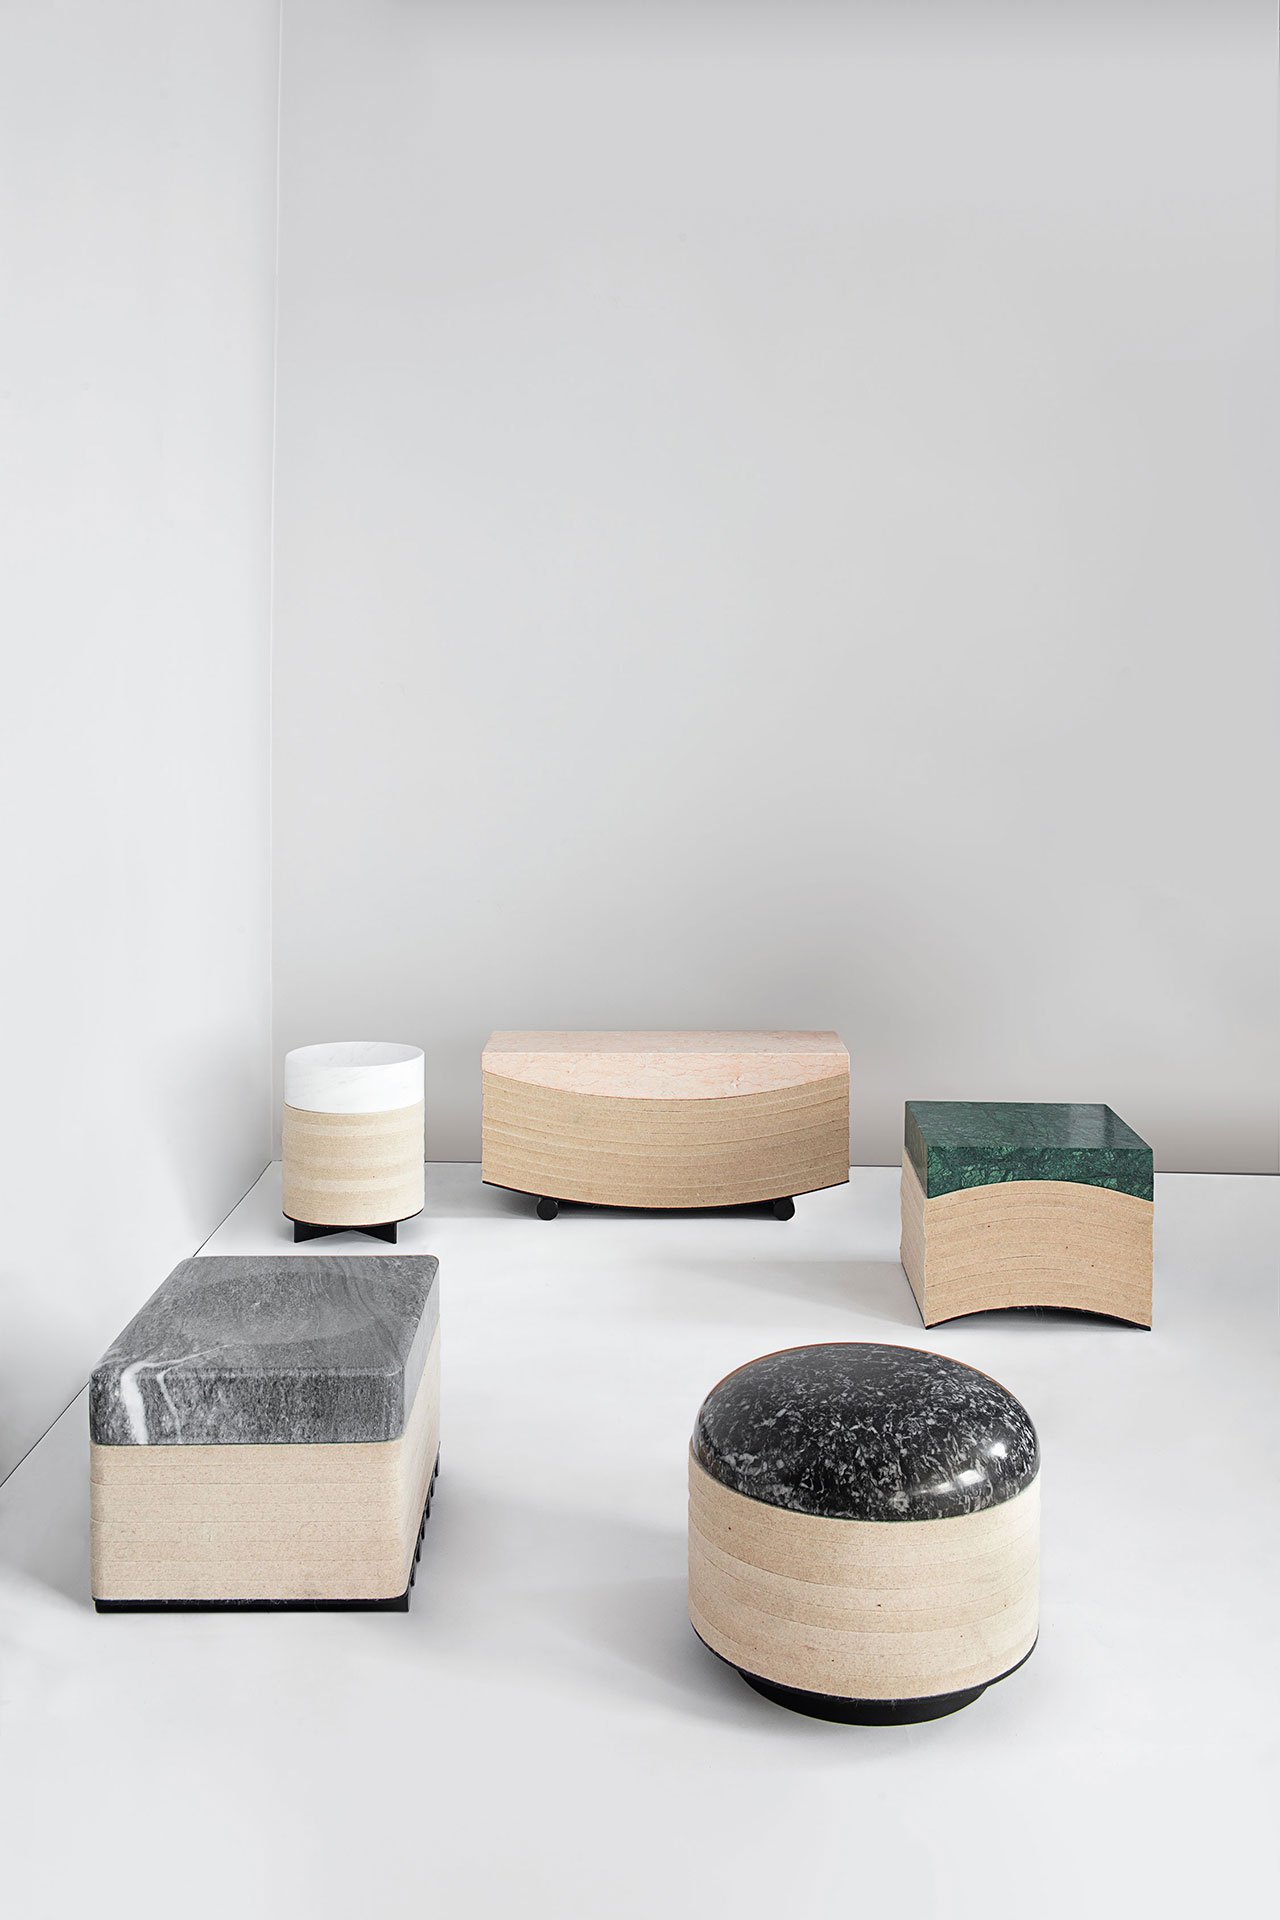 A Tale of Two Cities Athens  New York Based Design Studio ‘Objects of Common Interest’-36